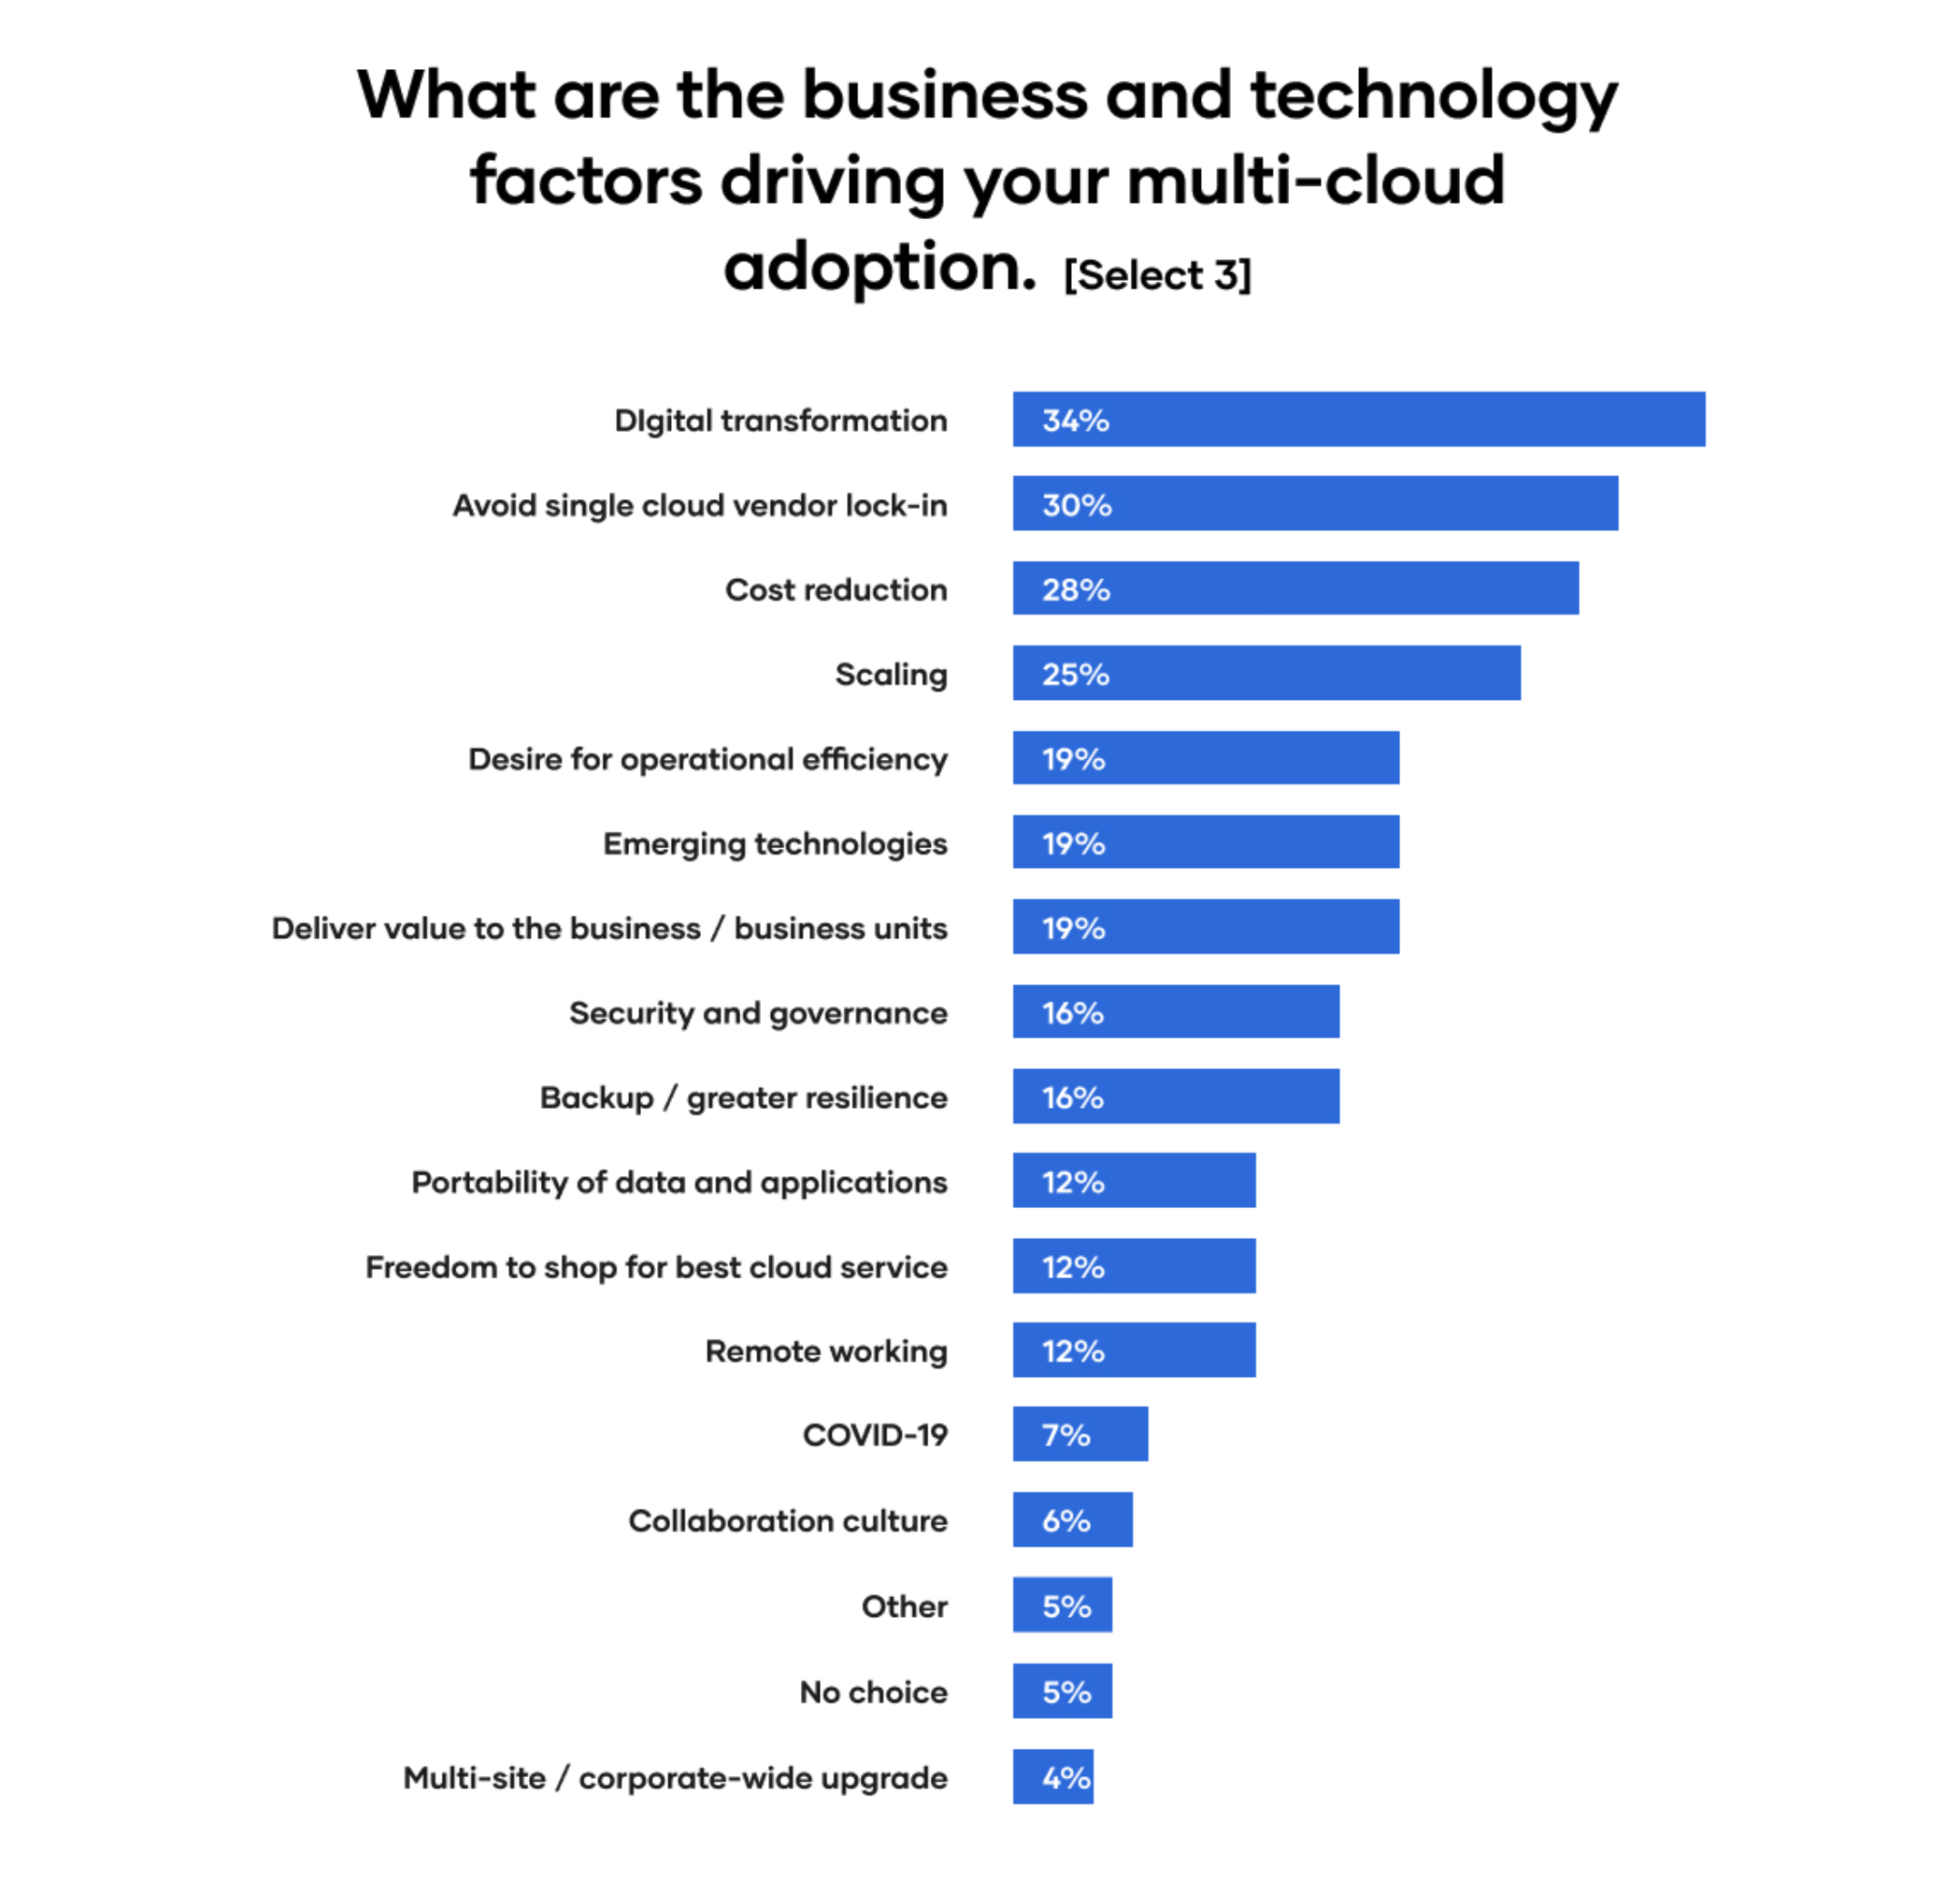 What are the business and technology factors driving your multi-cloud adoption?